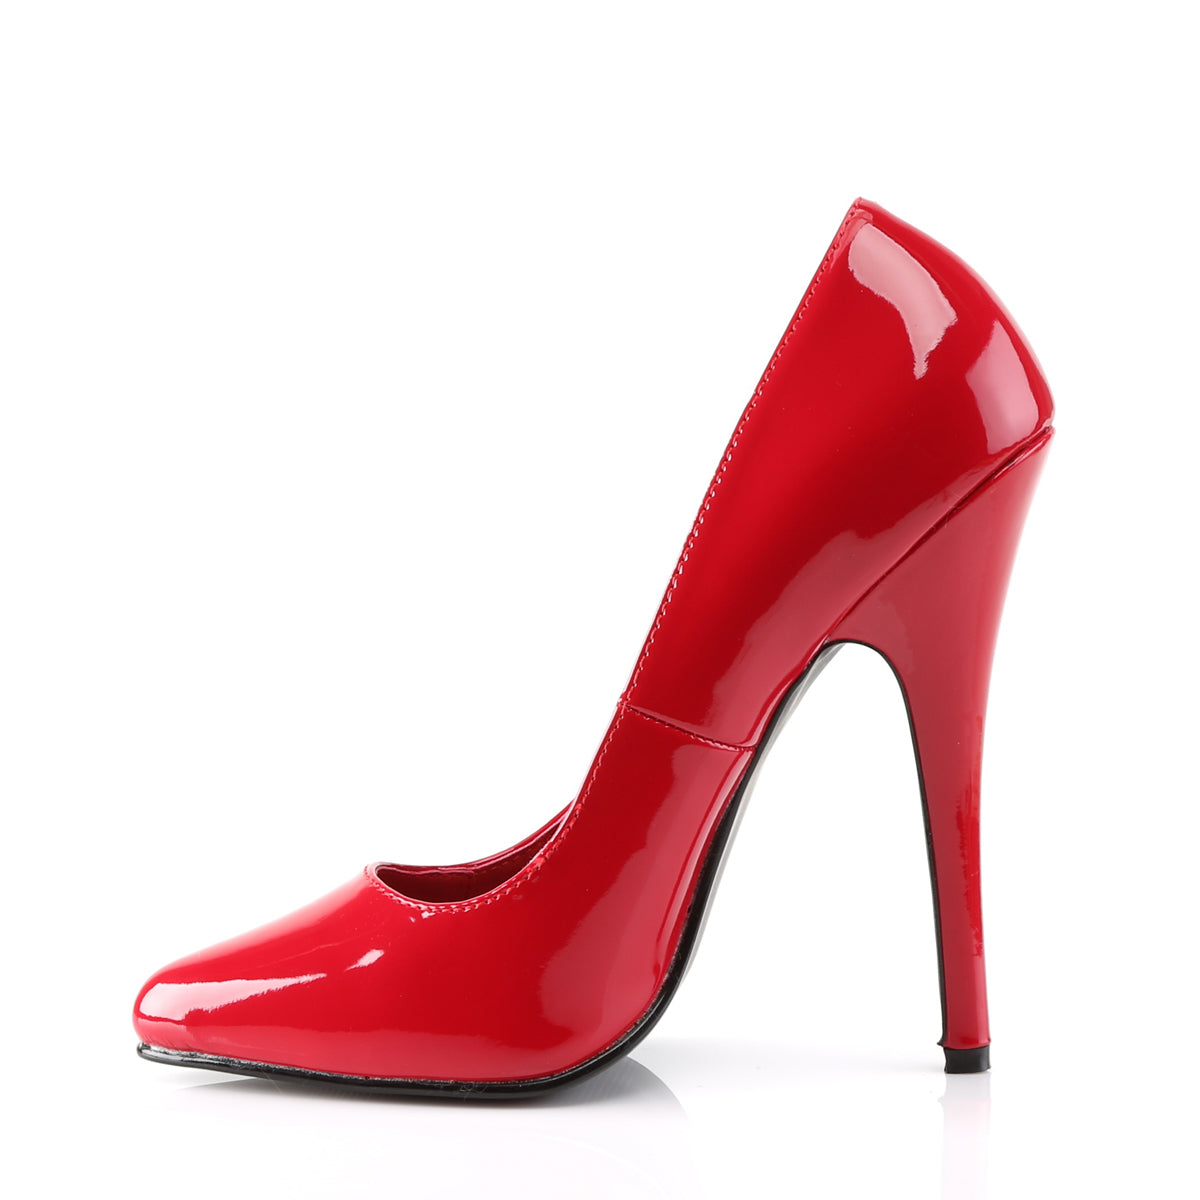 Devious Womens Pumps DOMINA-420 Red Pat